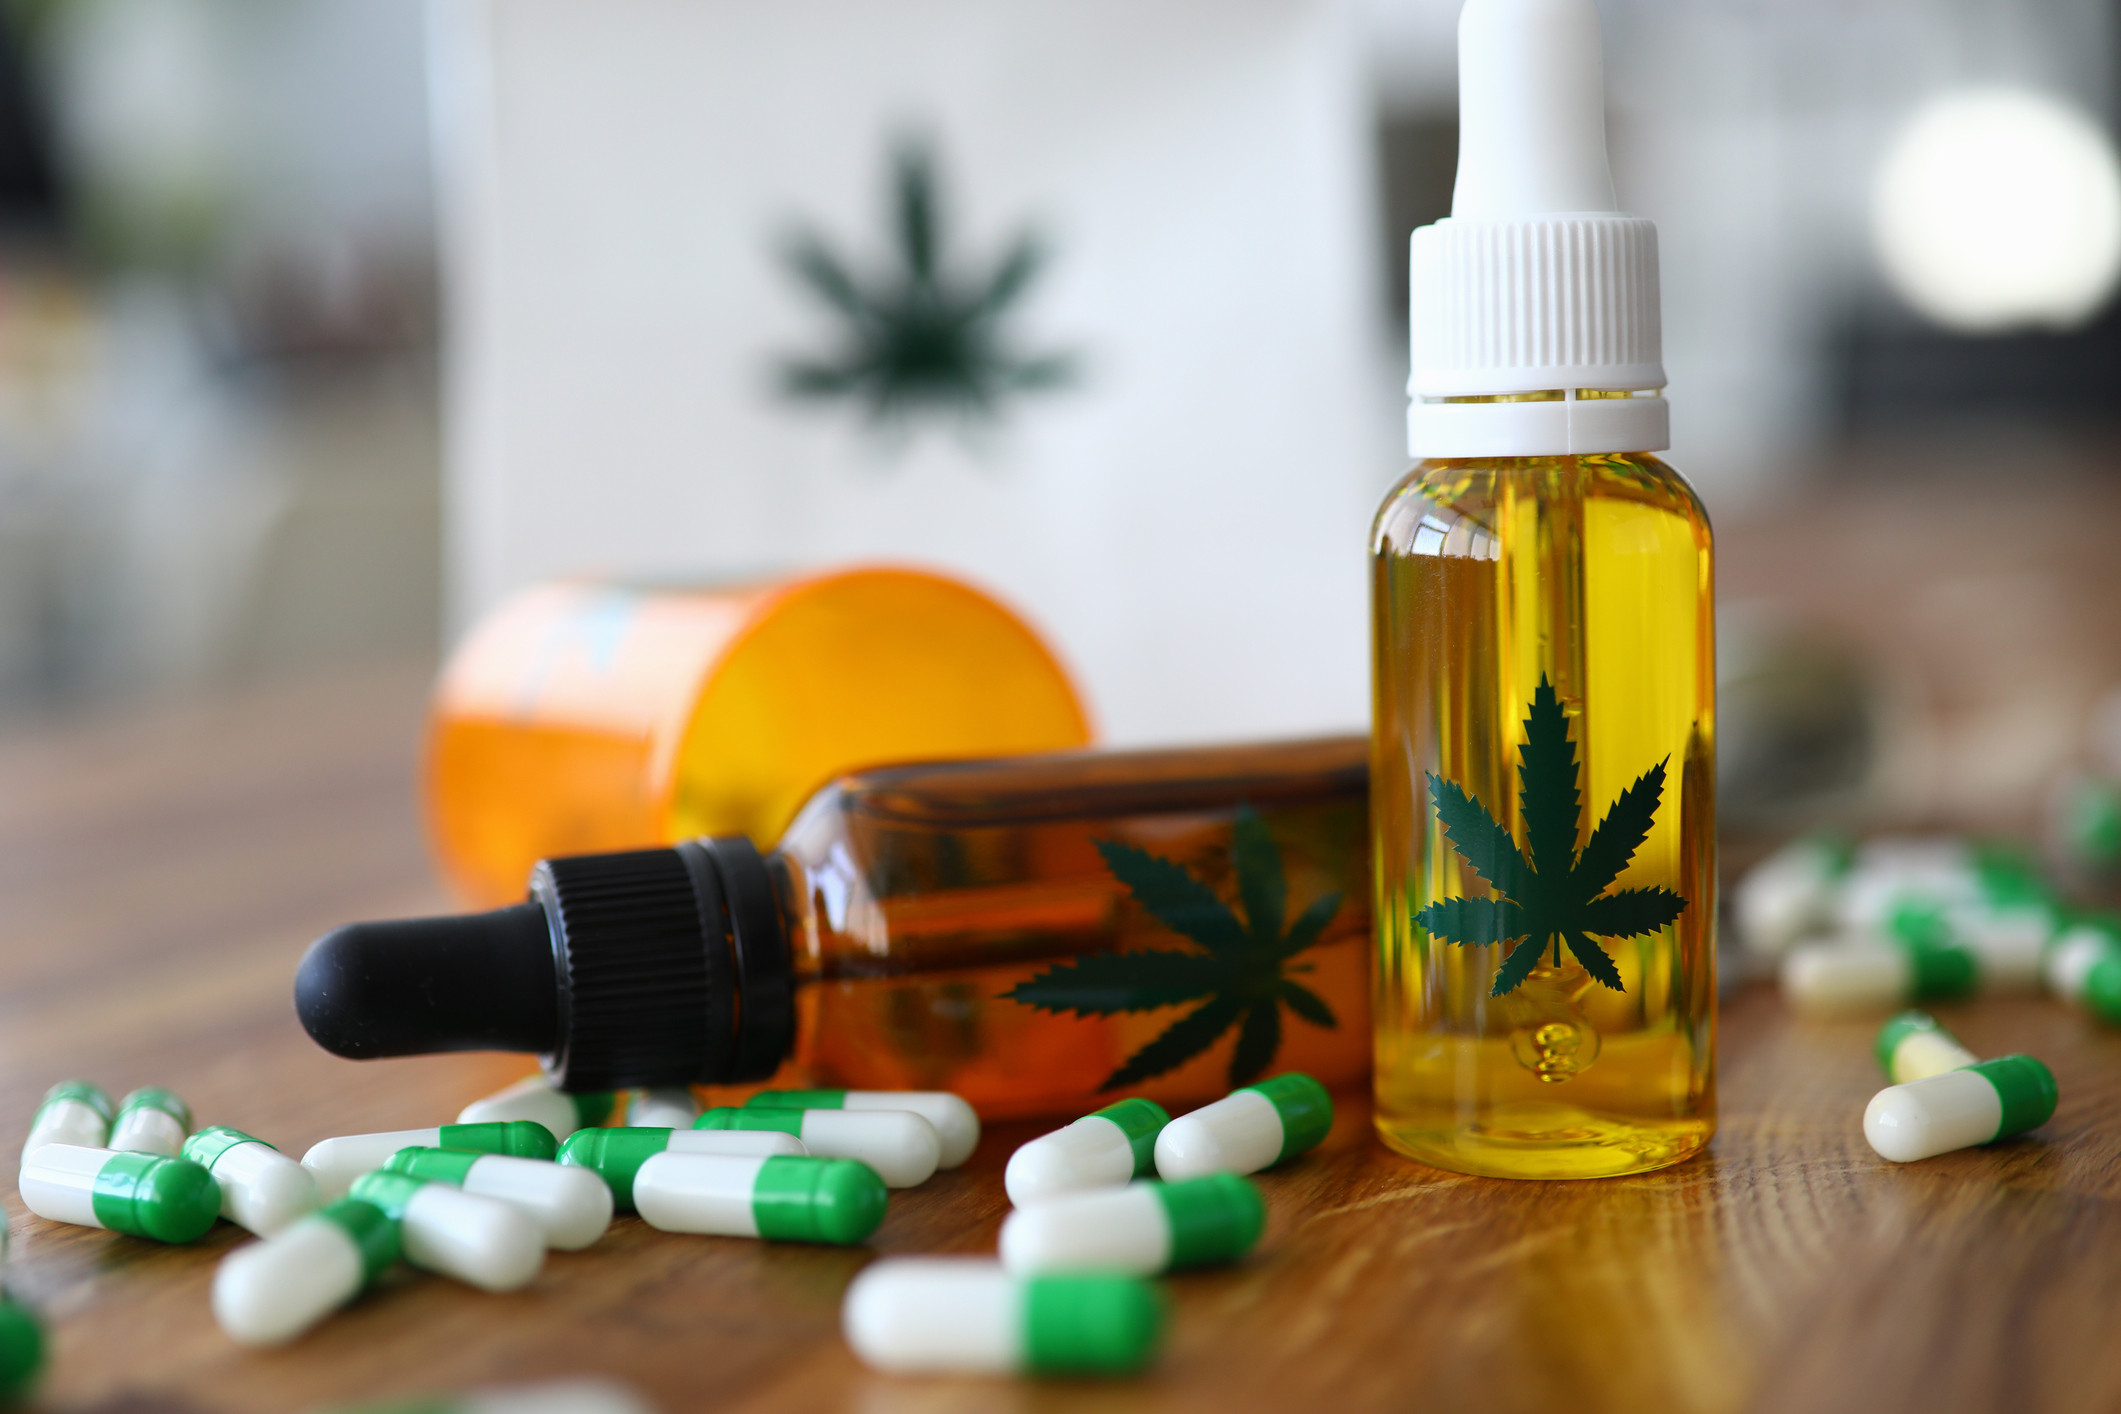 CBD drug bottles and green and white capsules on a wooden table